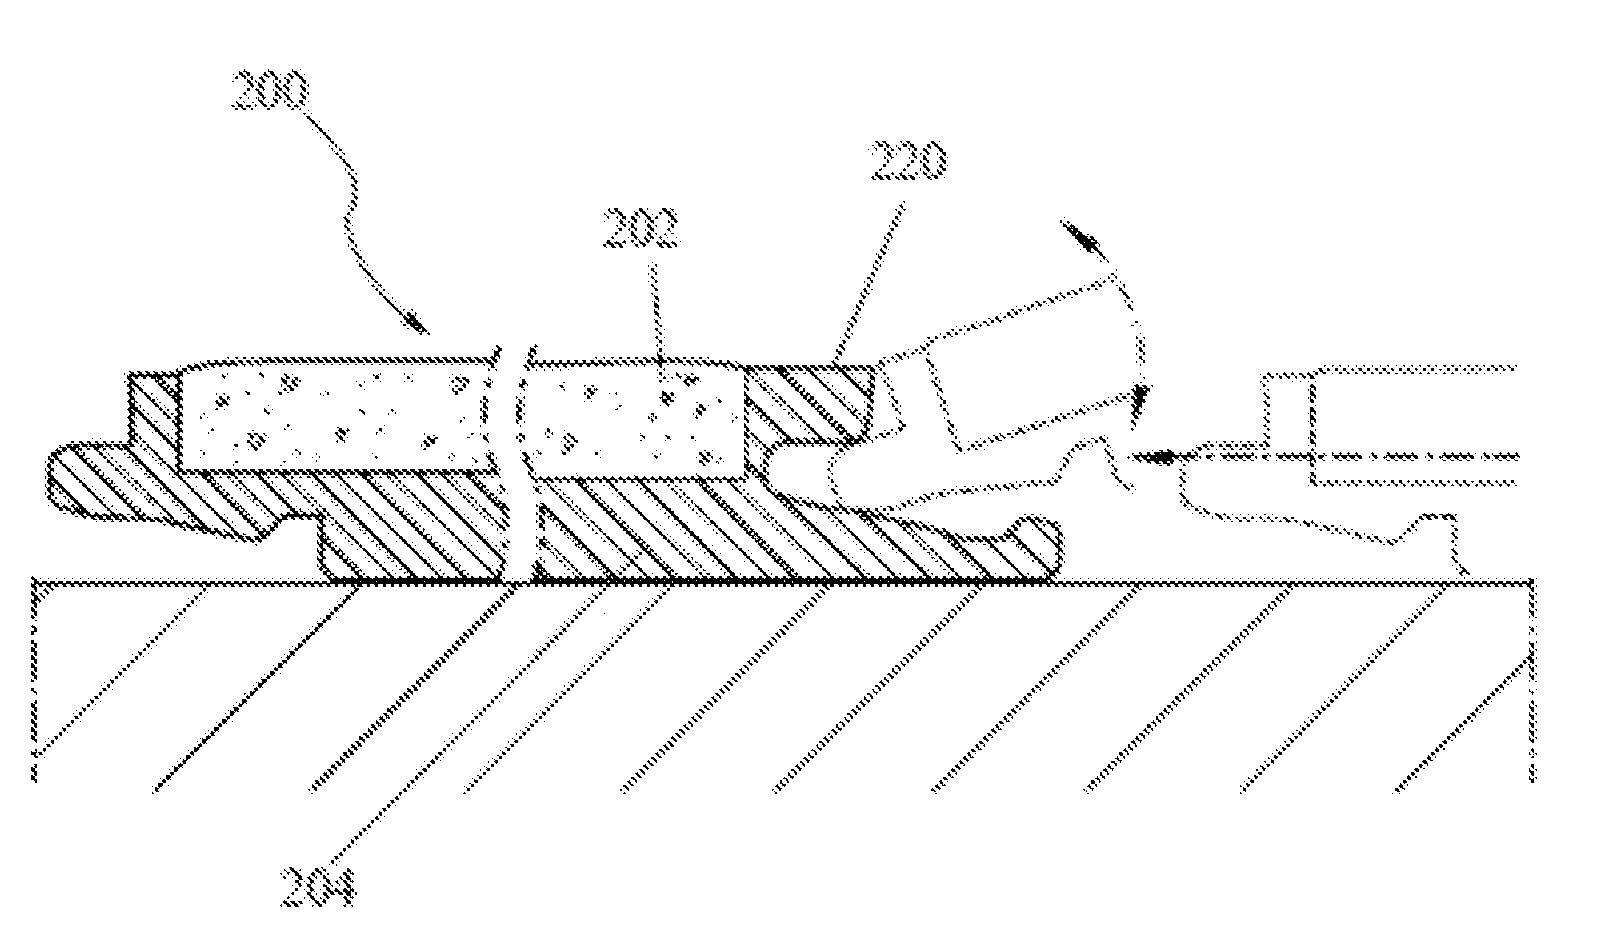 Groutless tile system and method for making the same